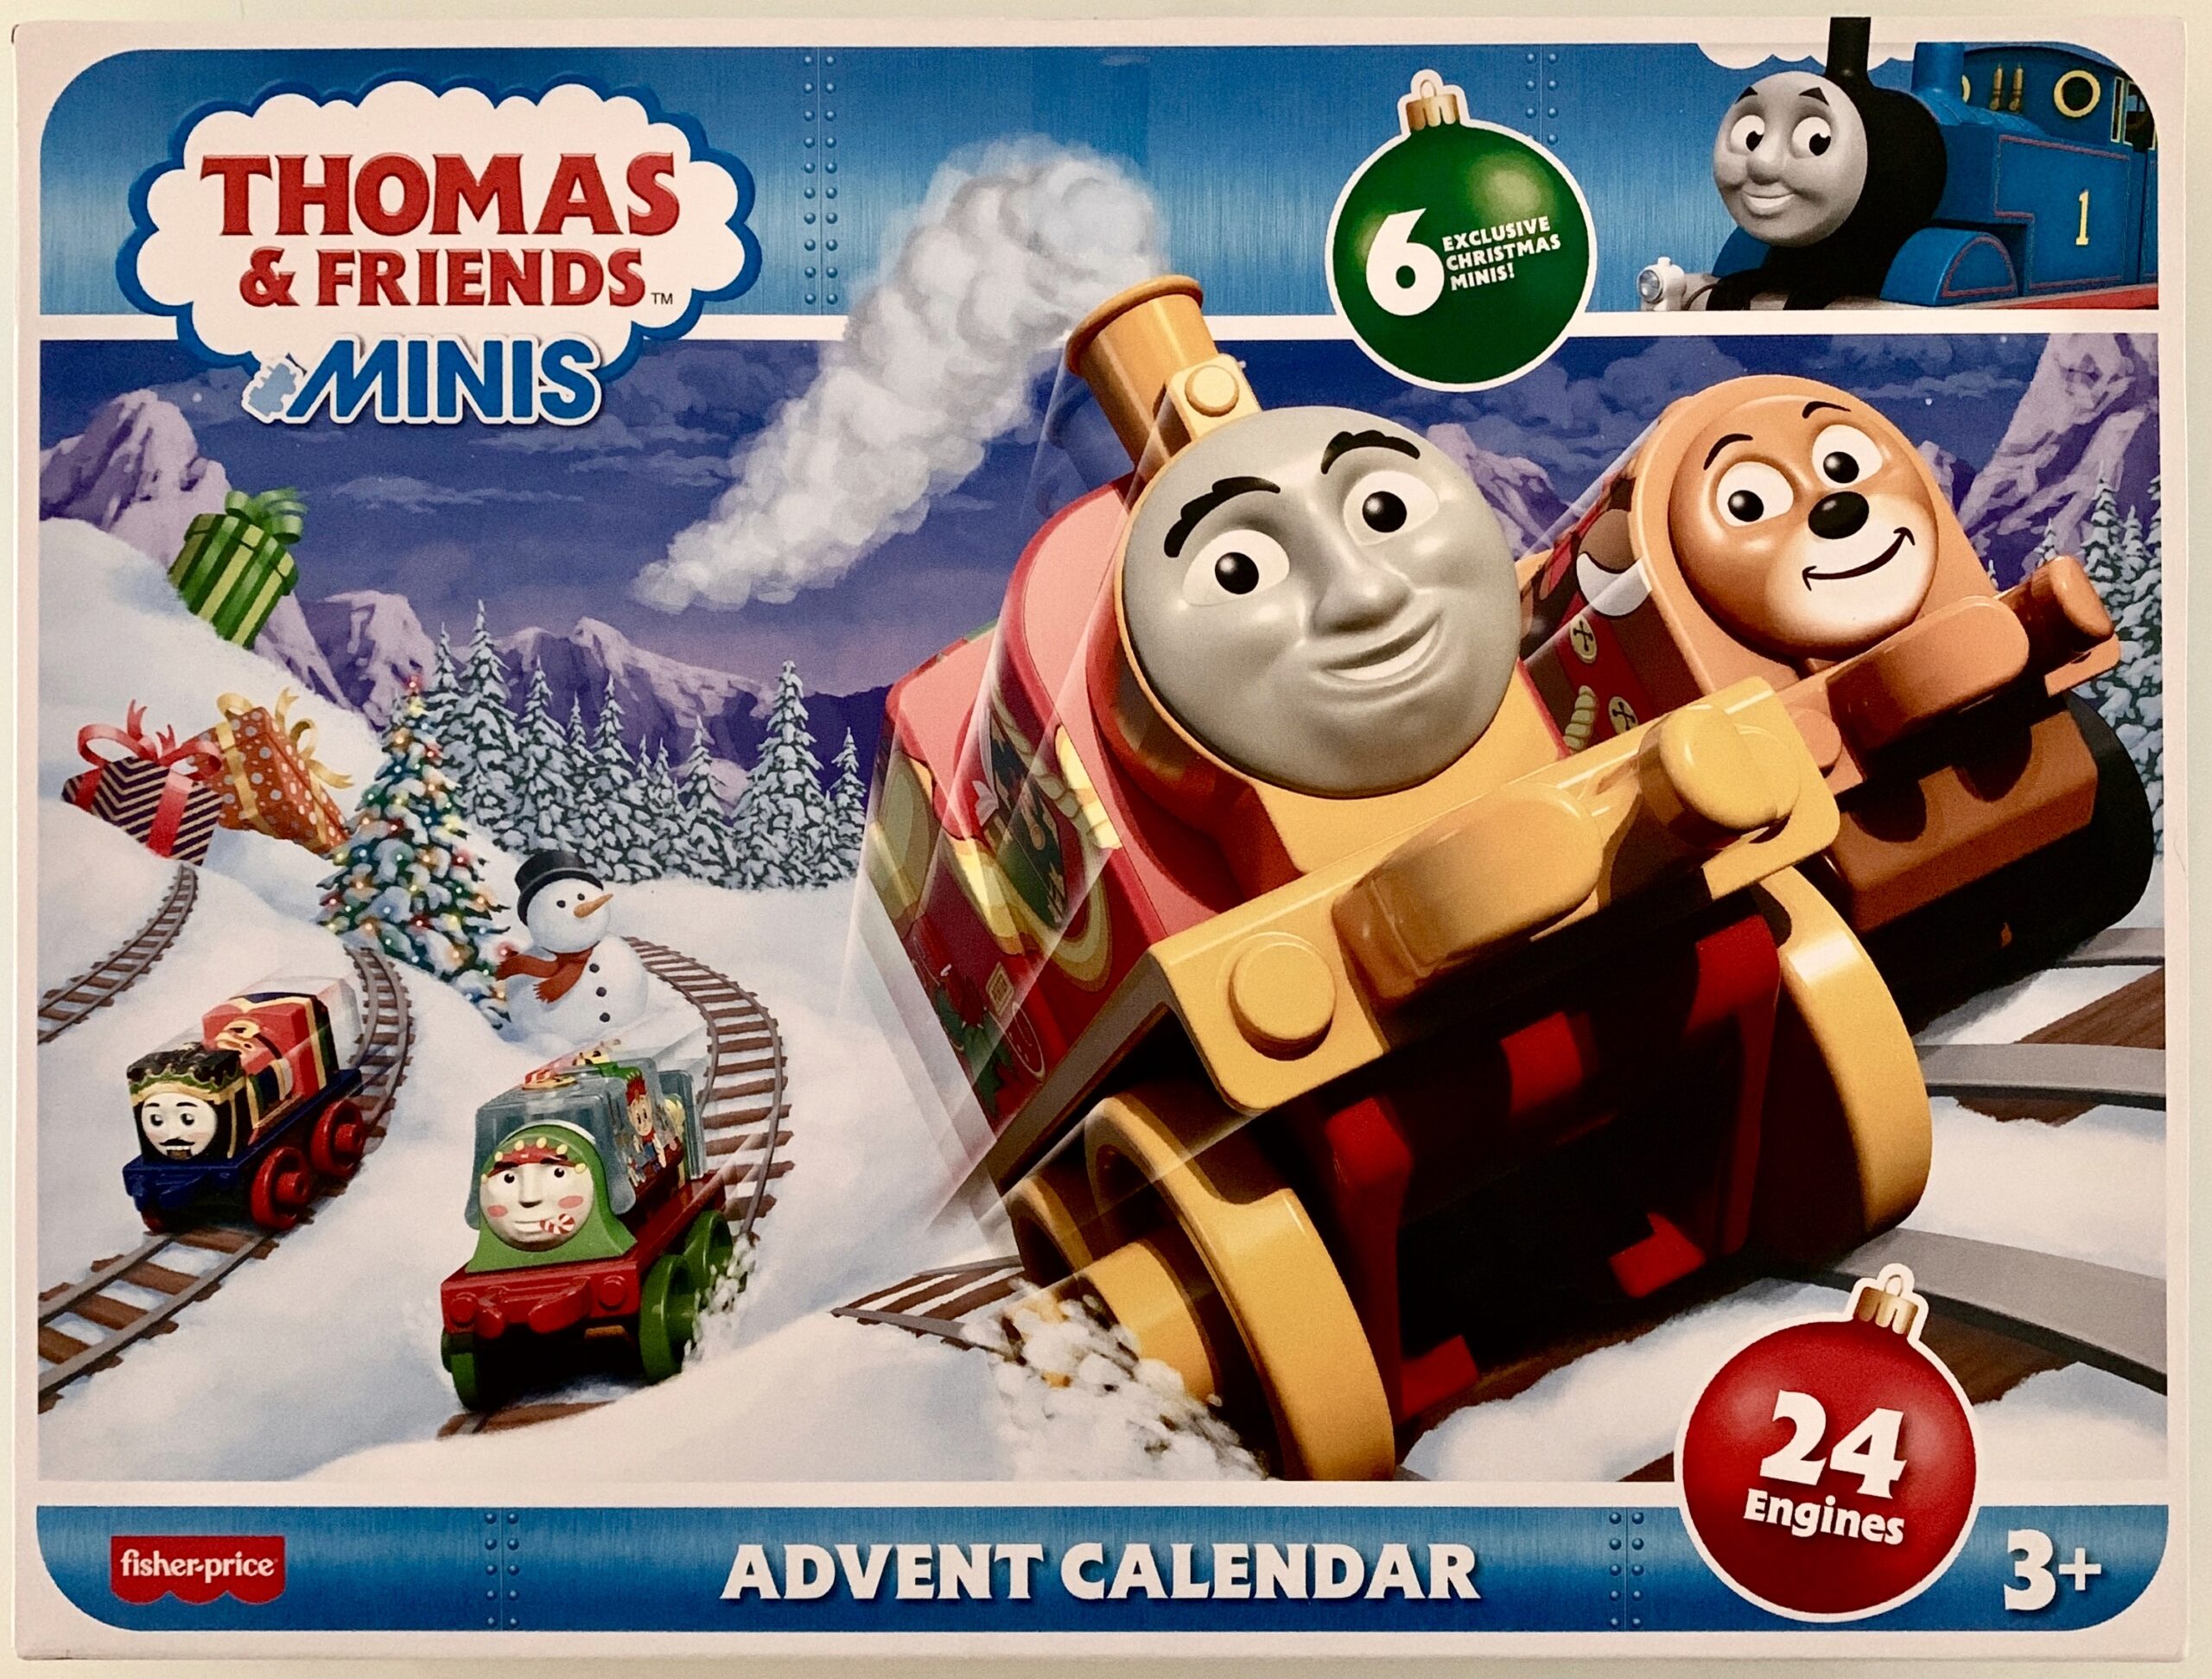  Thomas & Friends MINIS Advent Calendar 2023, Christmas Gift, 24  Miniature Toy Trains and Vehicles for Preschool Kids : Toys & Games